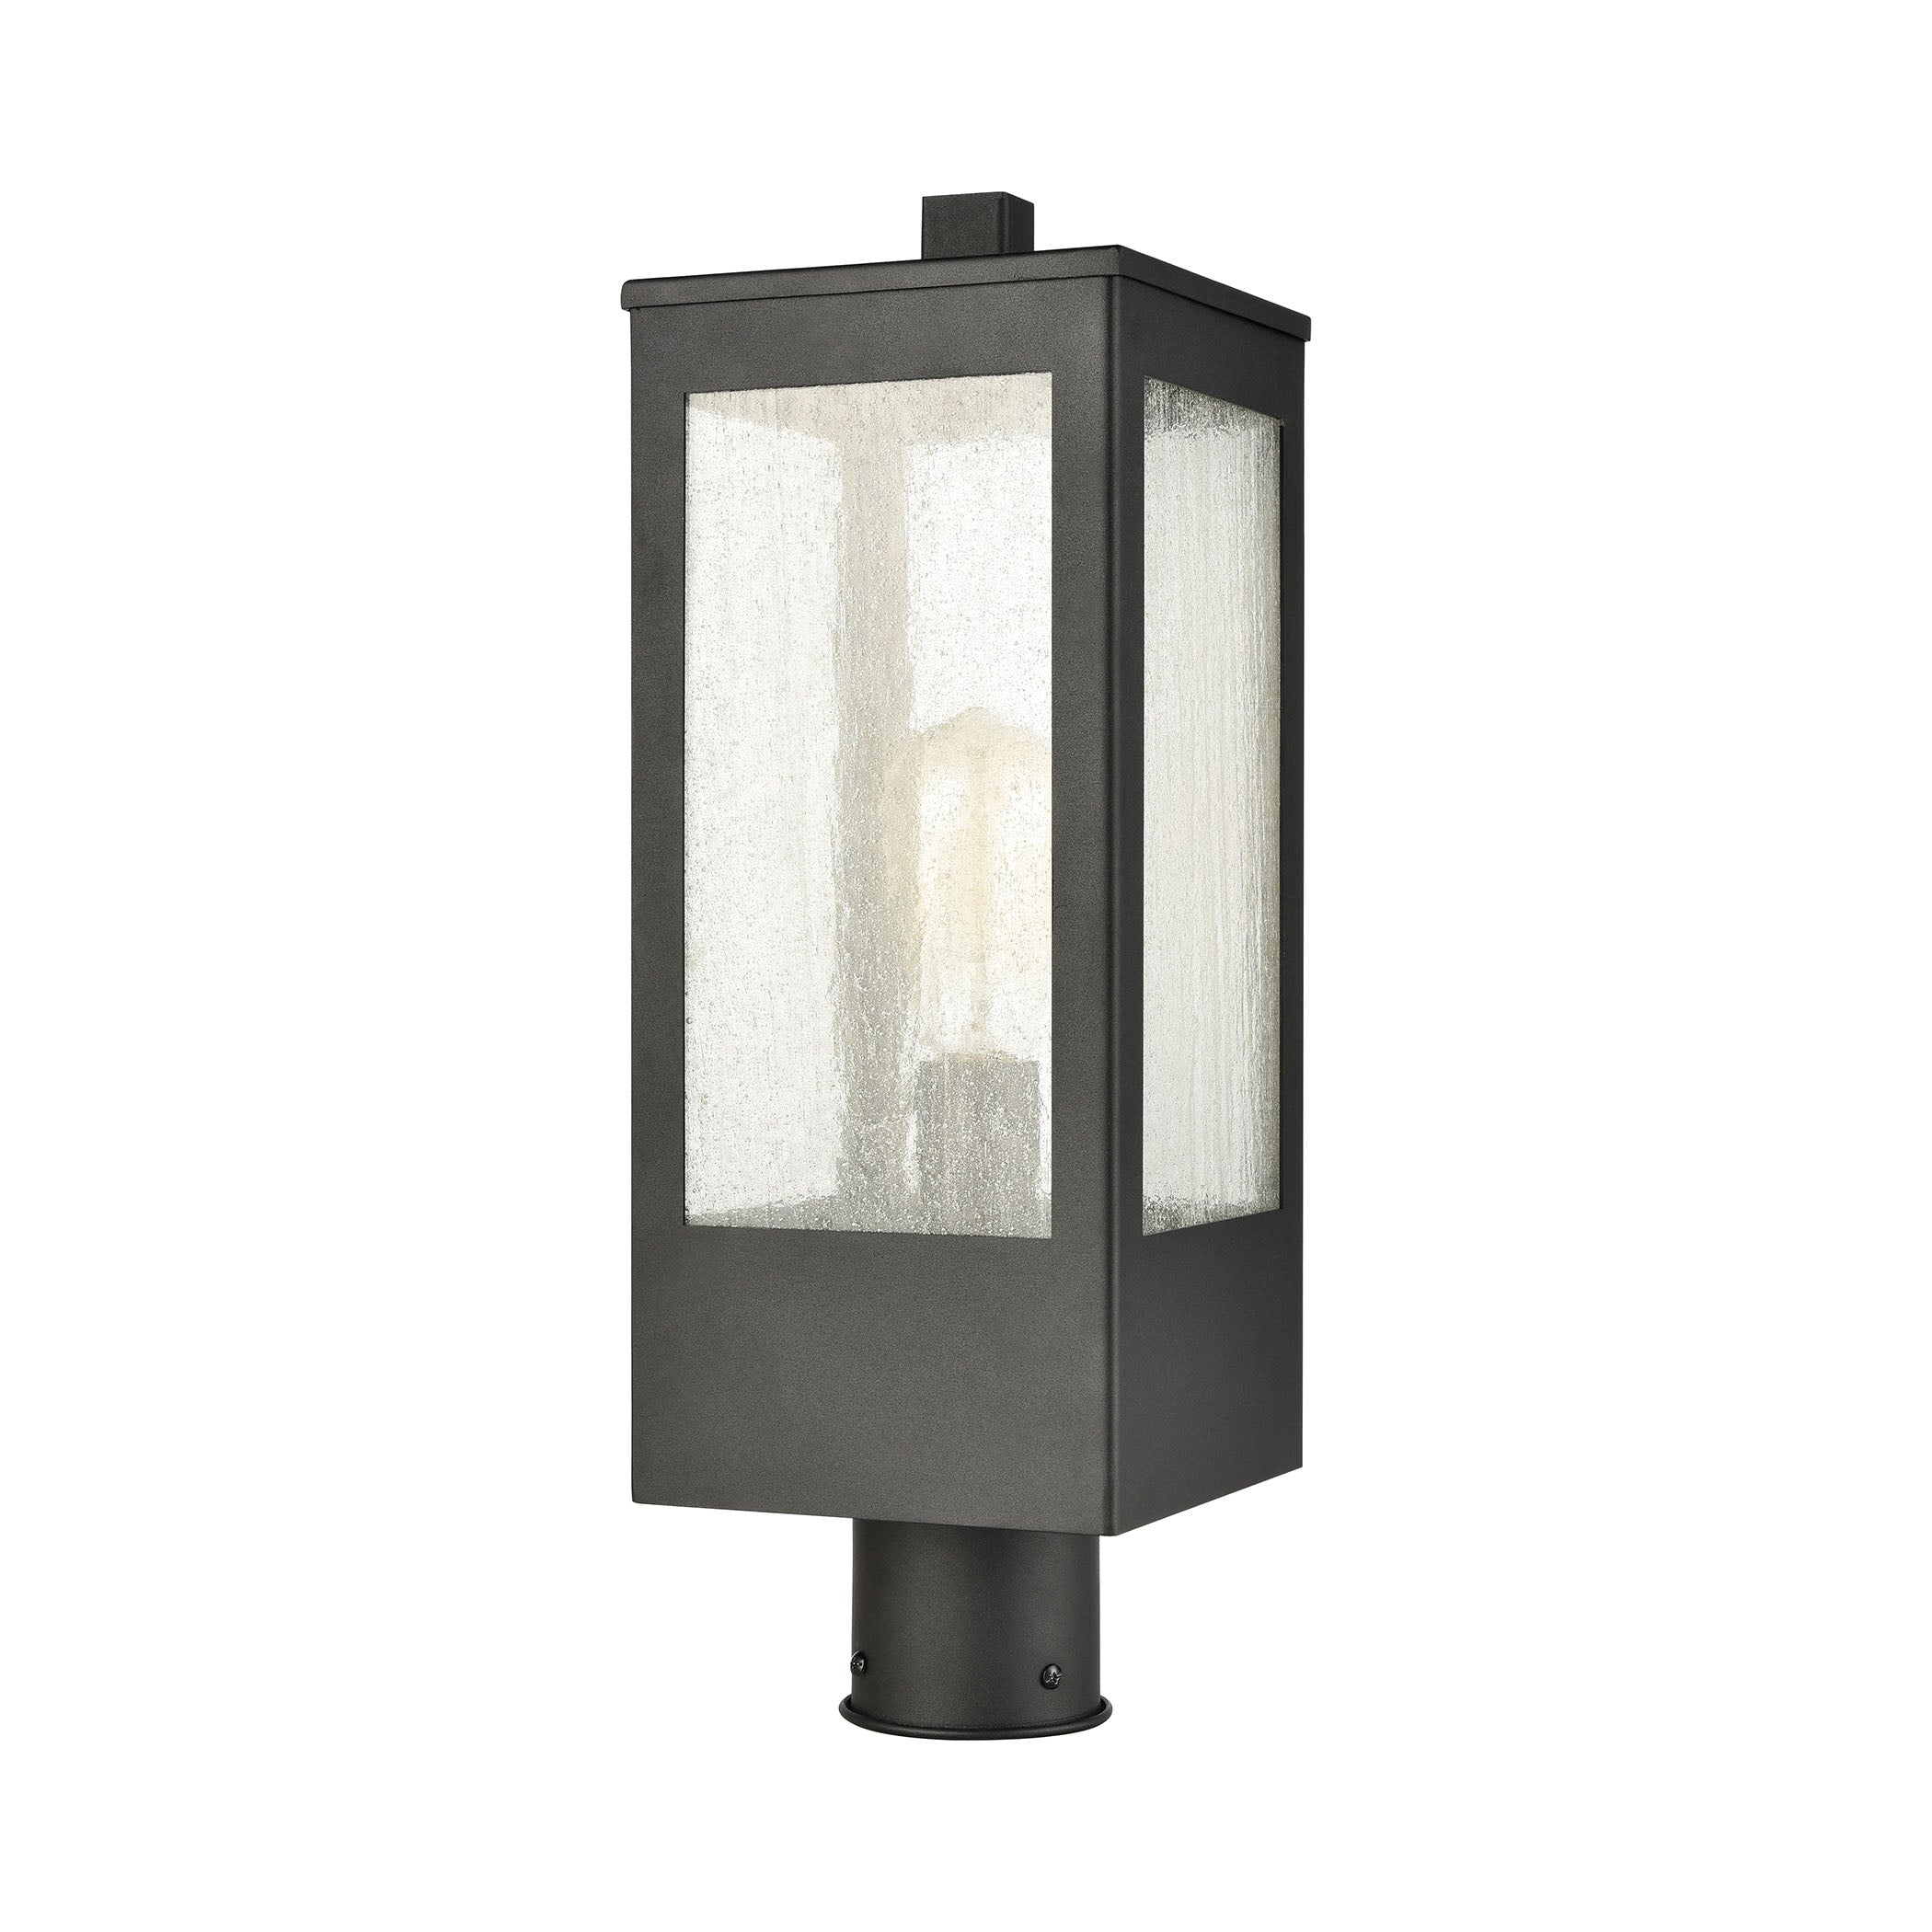 ELK Lighting 57304/1 Angus 1-Light Outdoor Post Mount in Charcoal with Seedy Glass Enclosure